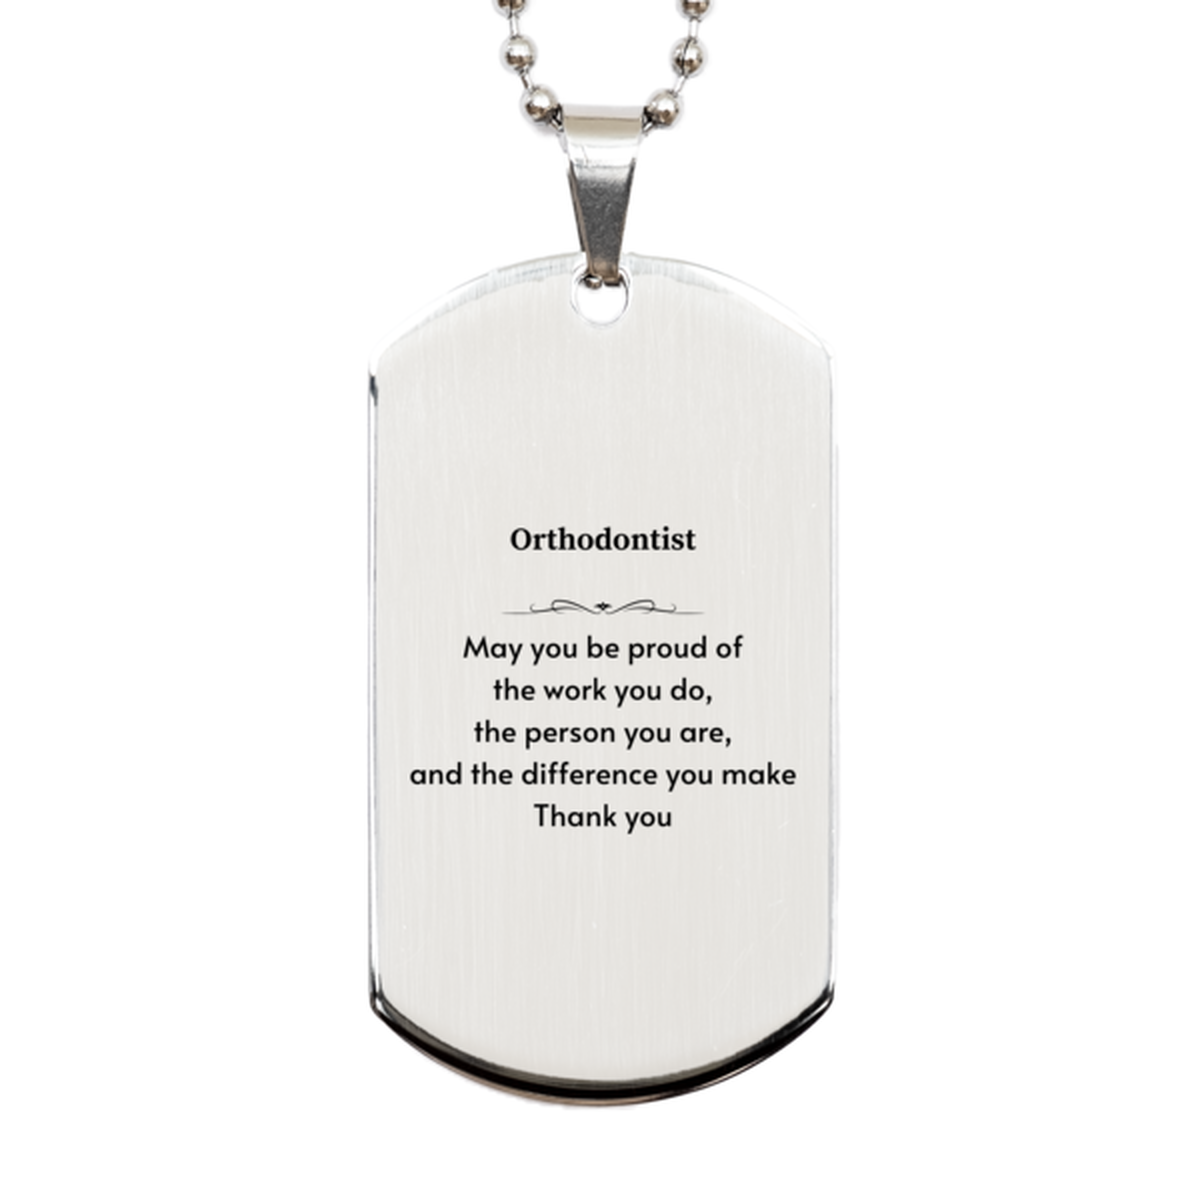 Heartwarming Silver Dog Tag Retirement Coworkers Gifts for Orthodontist, Orthodontist May You be proud of the work you do, the person you are Gifts for Boss Men Women Friends